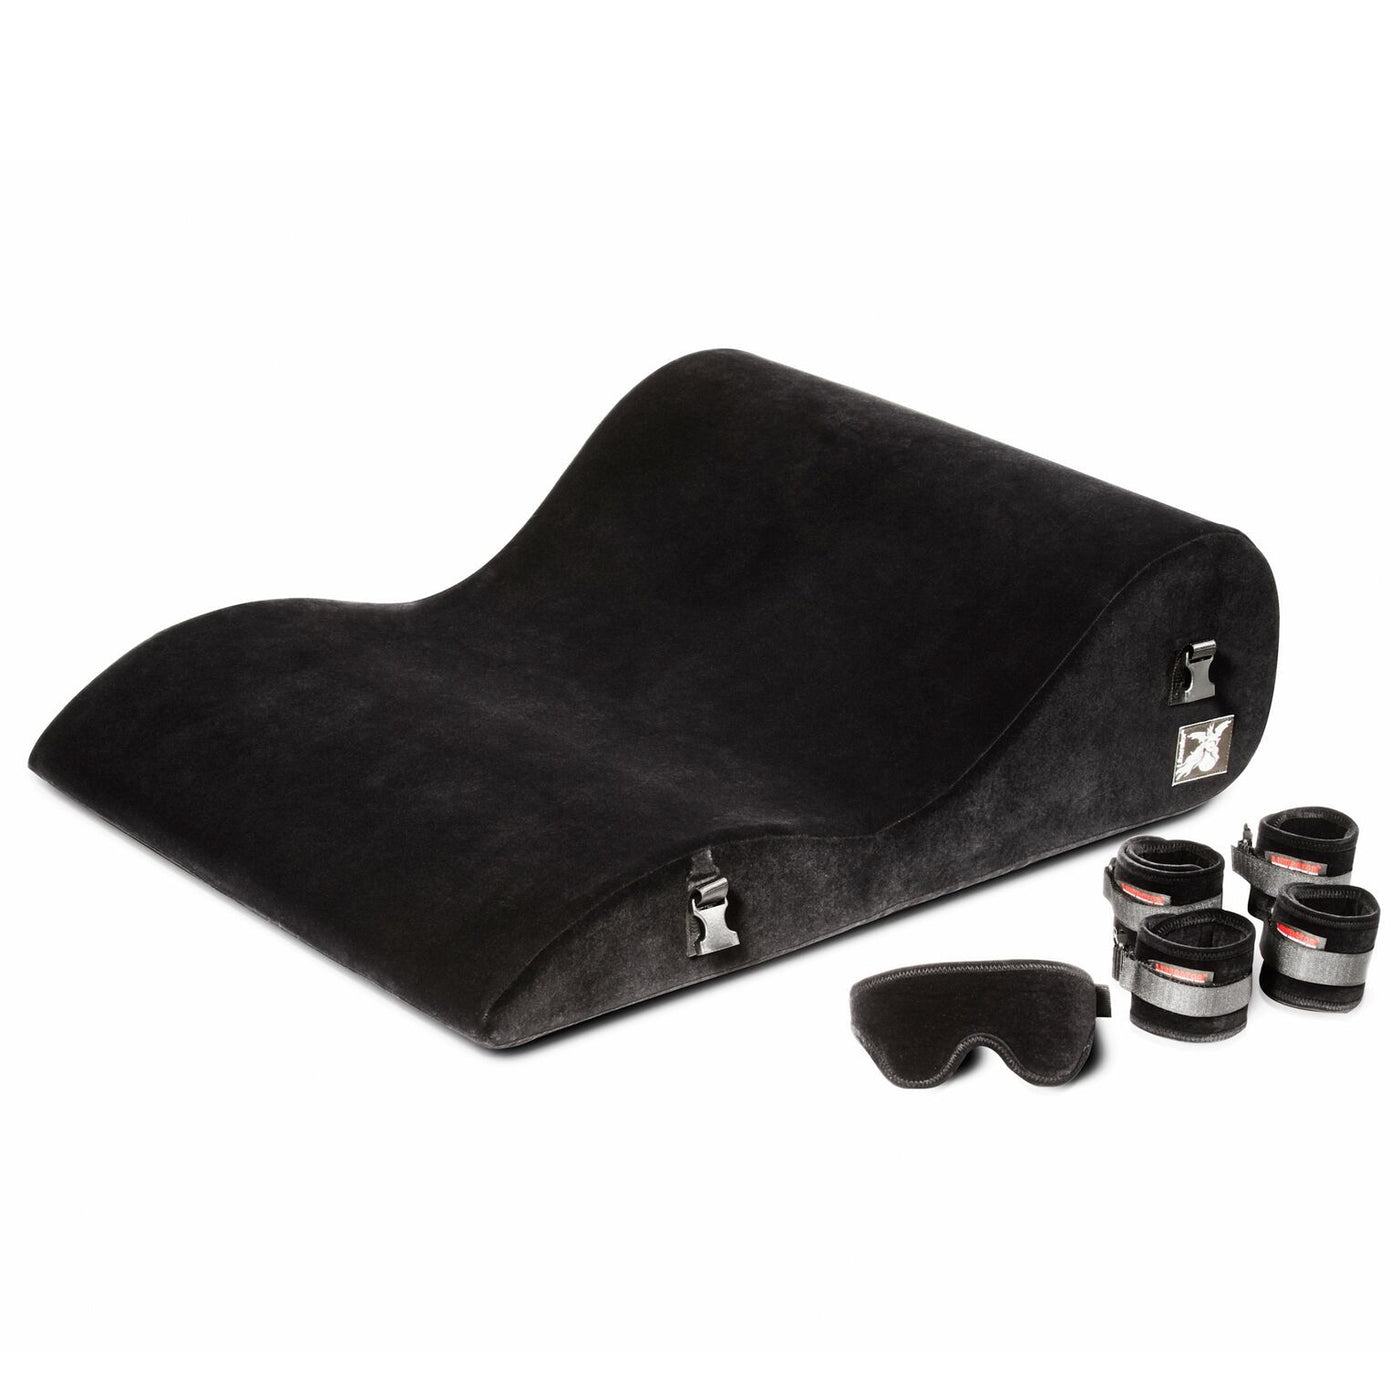 Liberator Black Label Hipster Sex Cushion with Wrist Cuffs, Blindfold, & Tethers - Hamilton Park Electronics